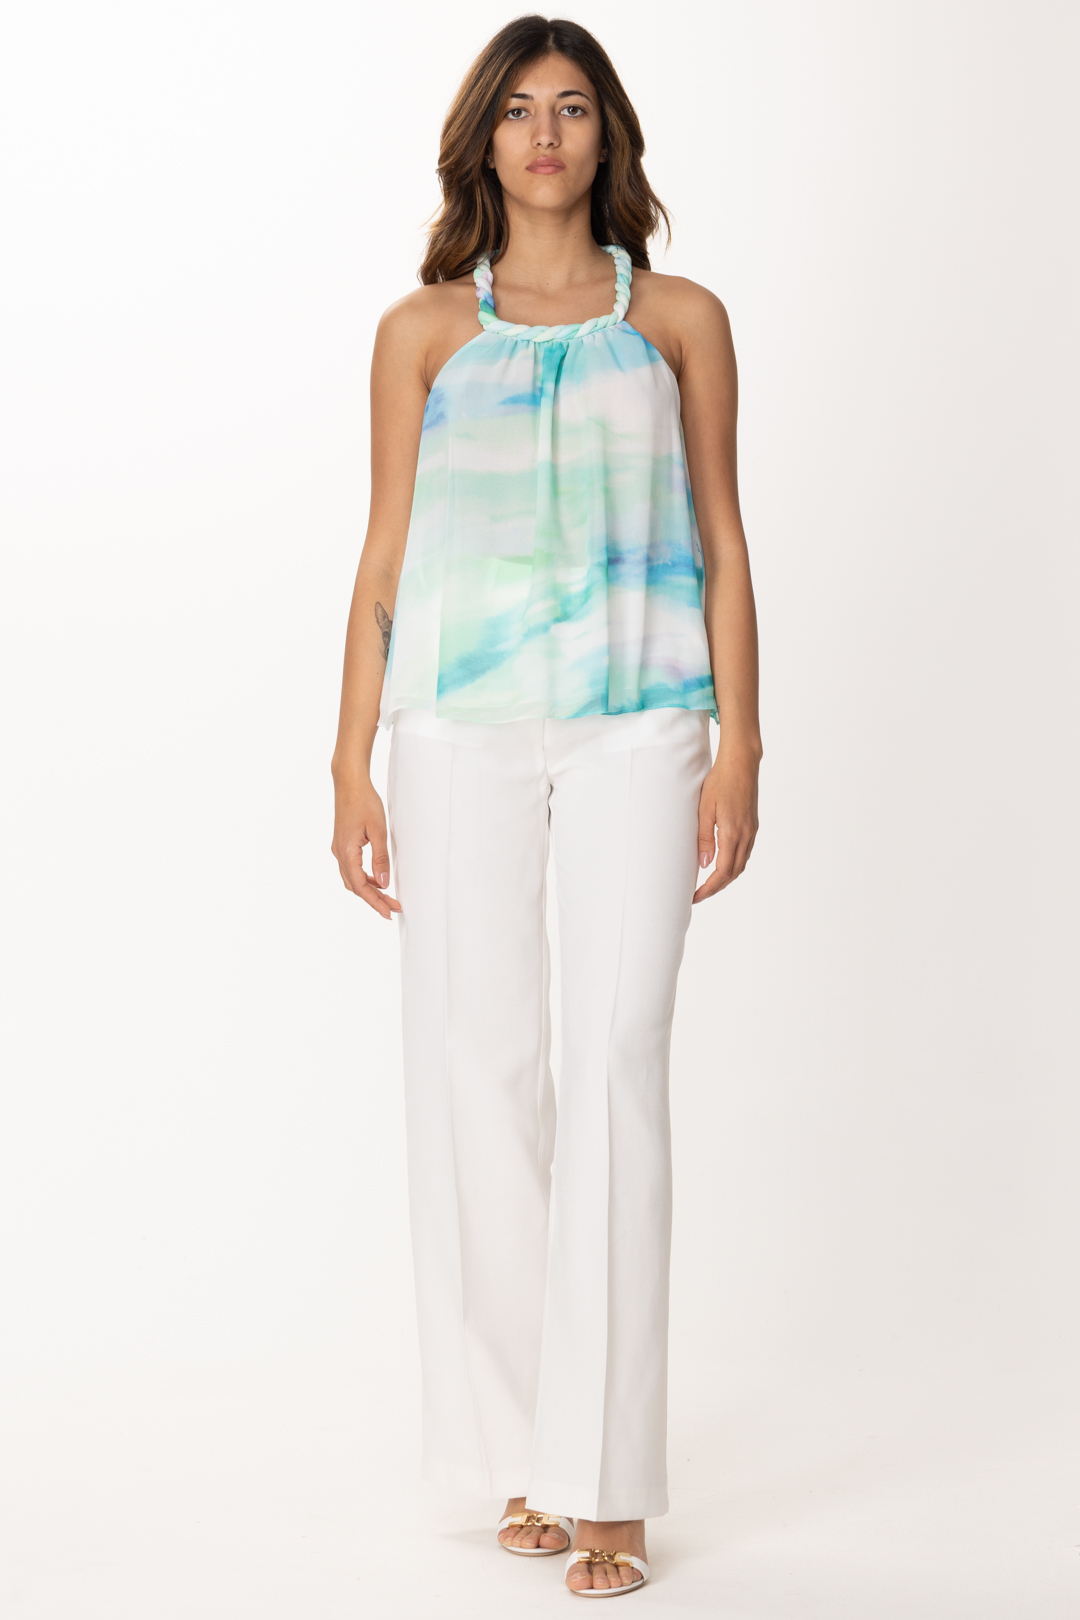 Preview: Patrizia Pepe Multicolor top with braided detail Aquatic Camu